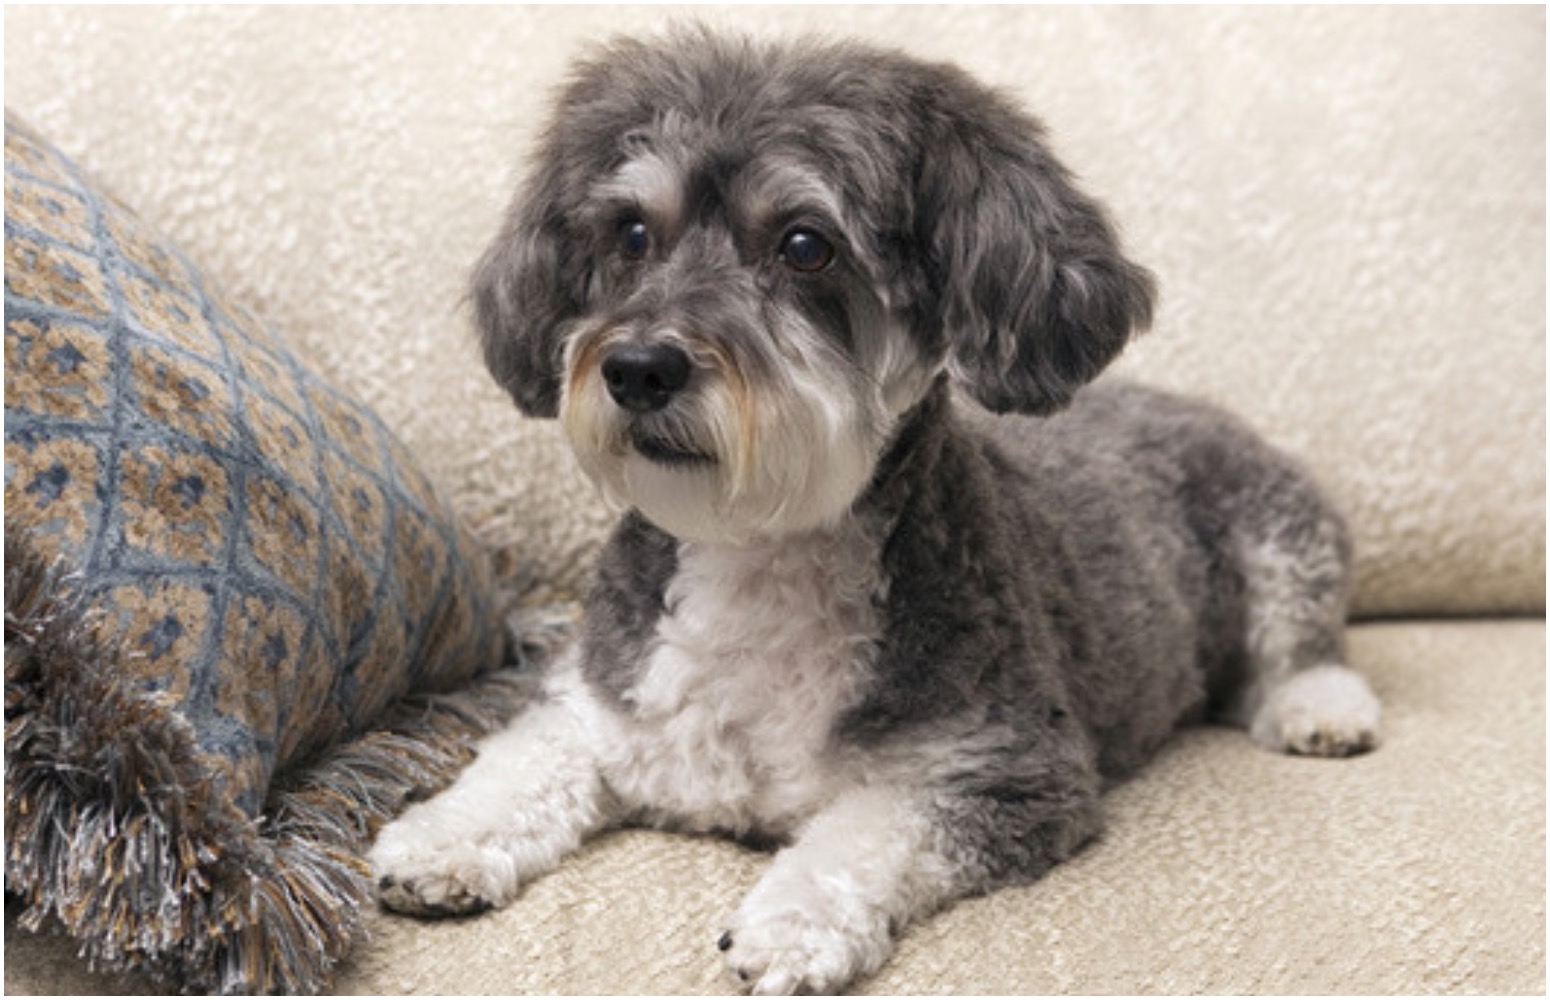 An adorable Schnauzer Poodle mix dog sitting on its owner’s couch